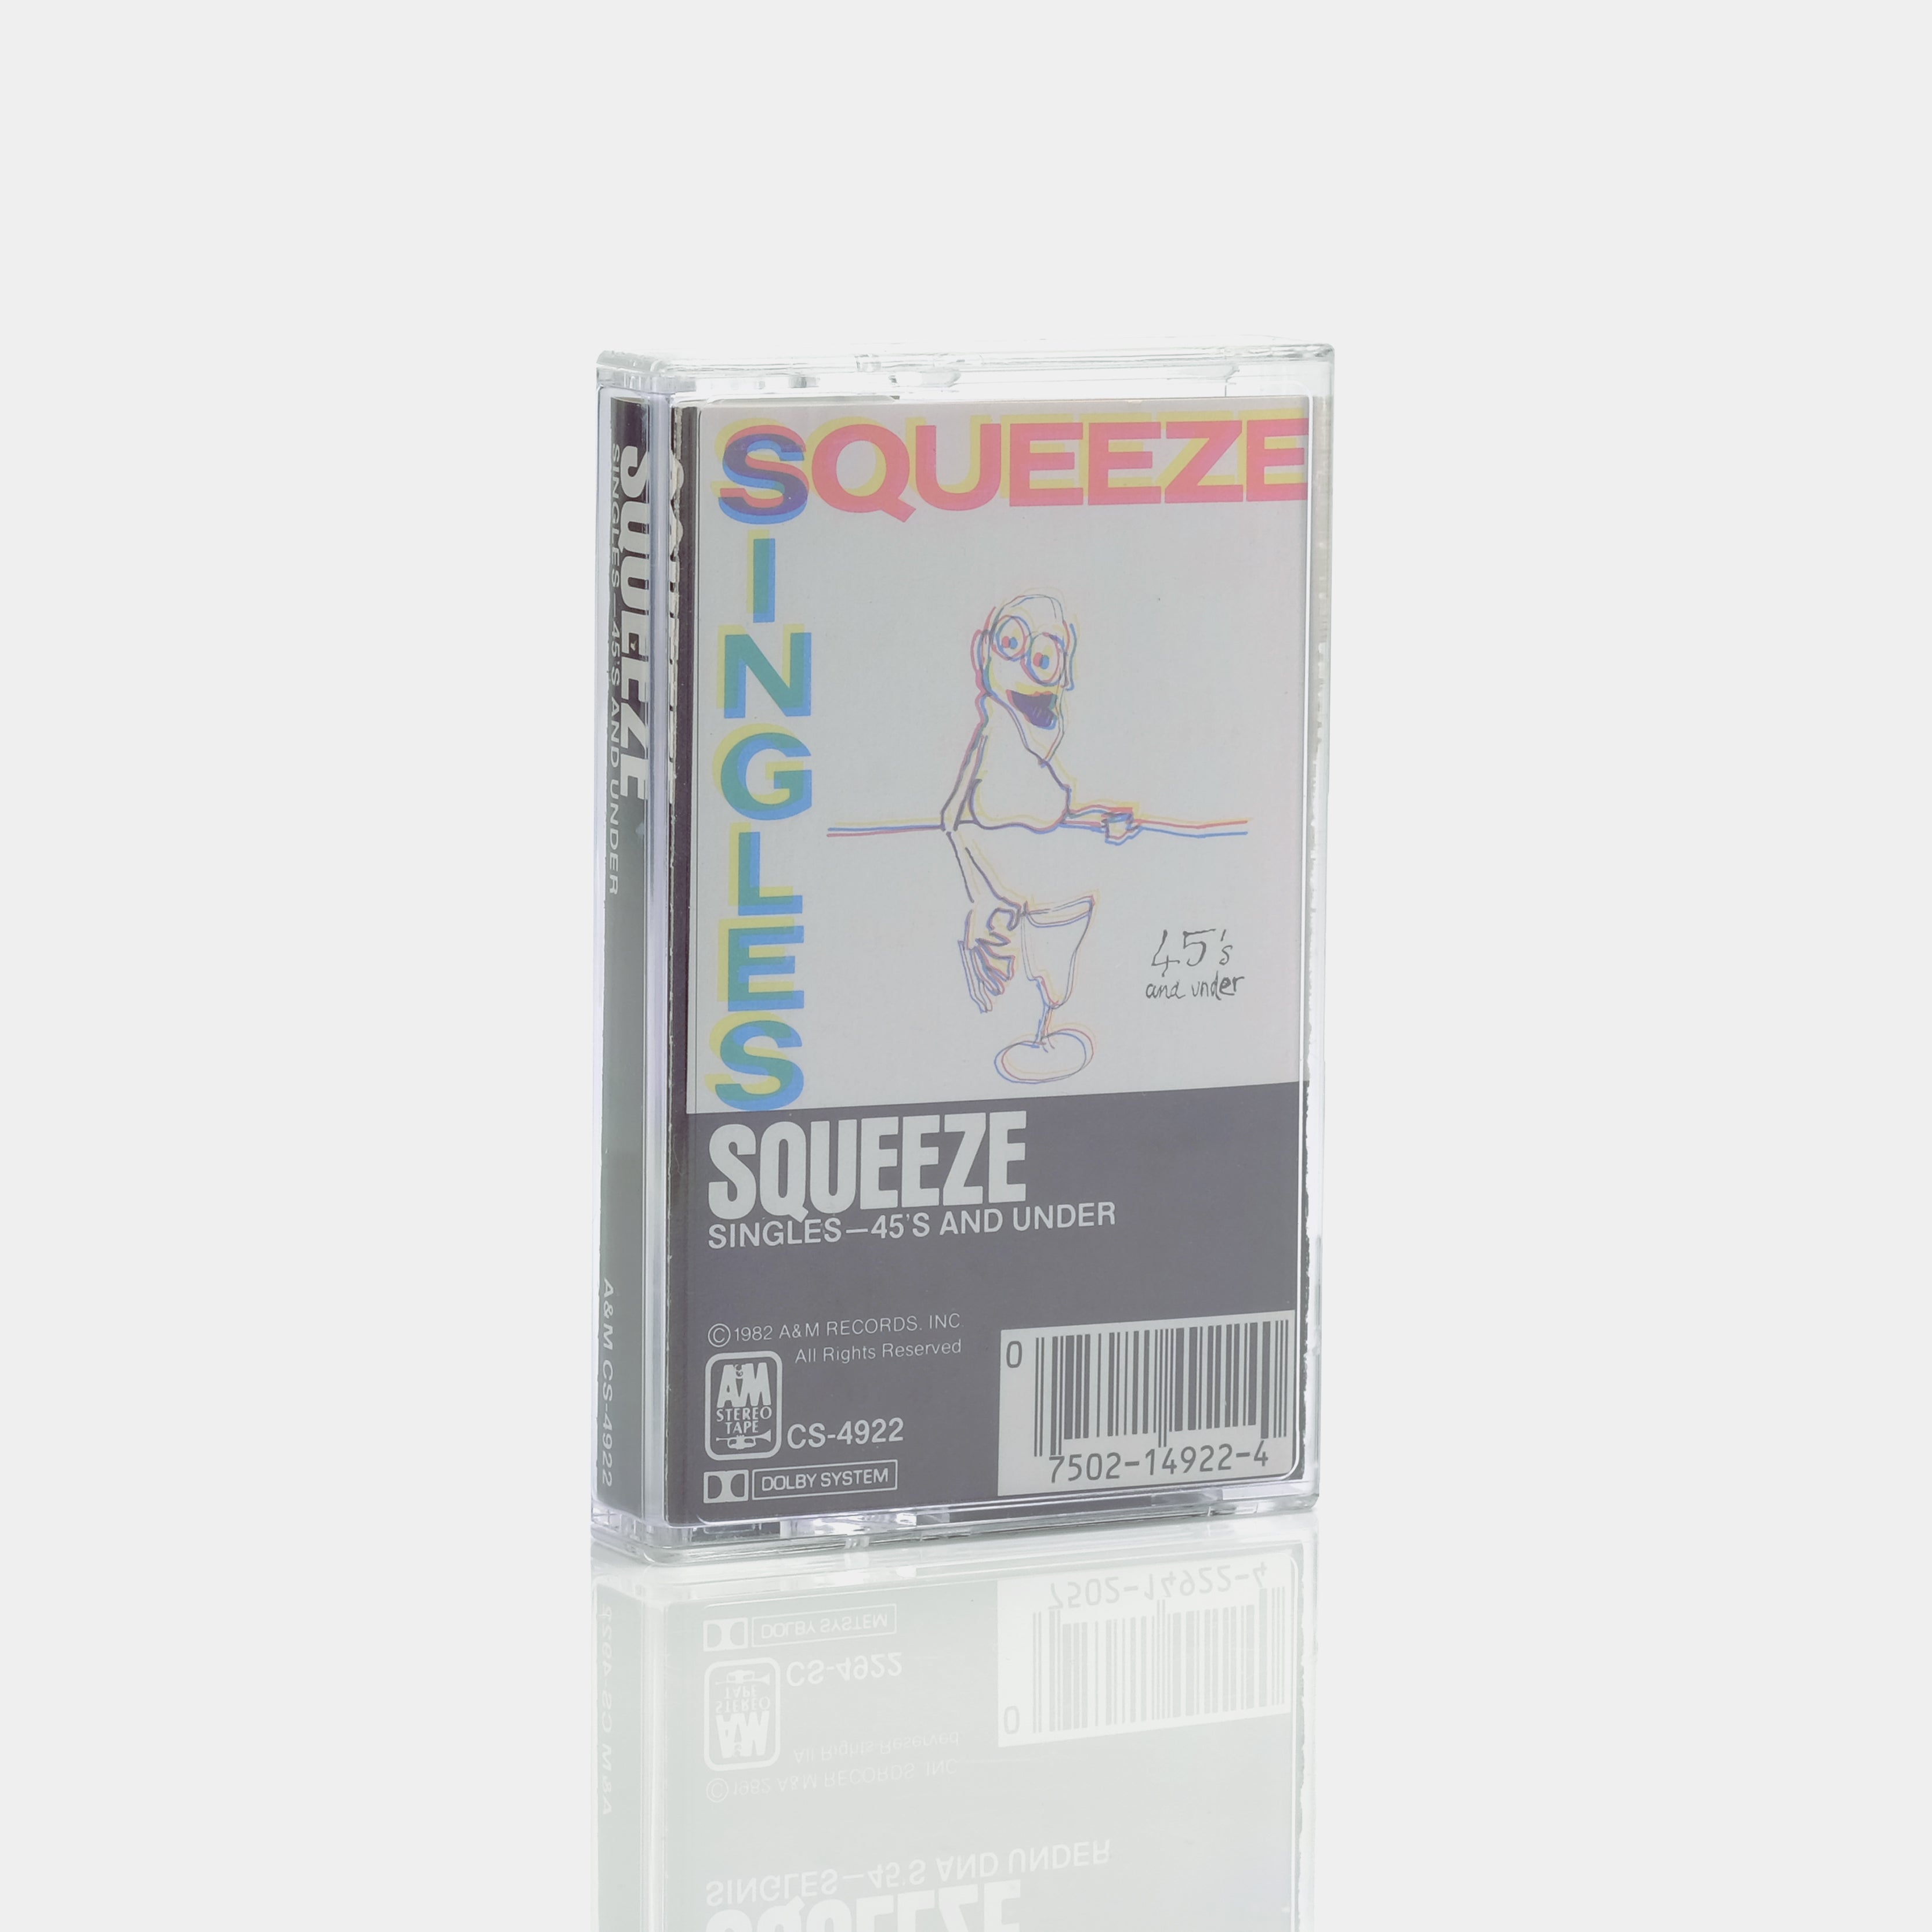 Squeeze - Singles - 45's And Under Cassette Tape